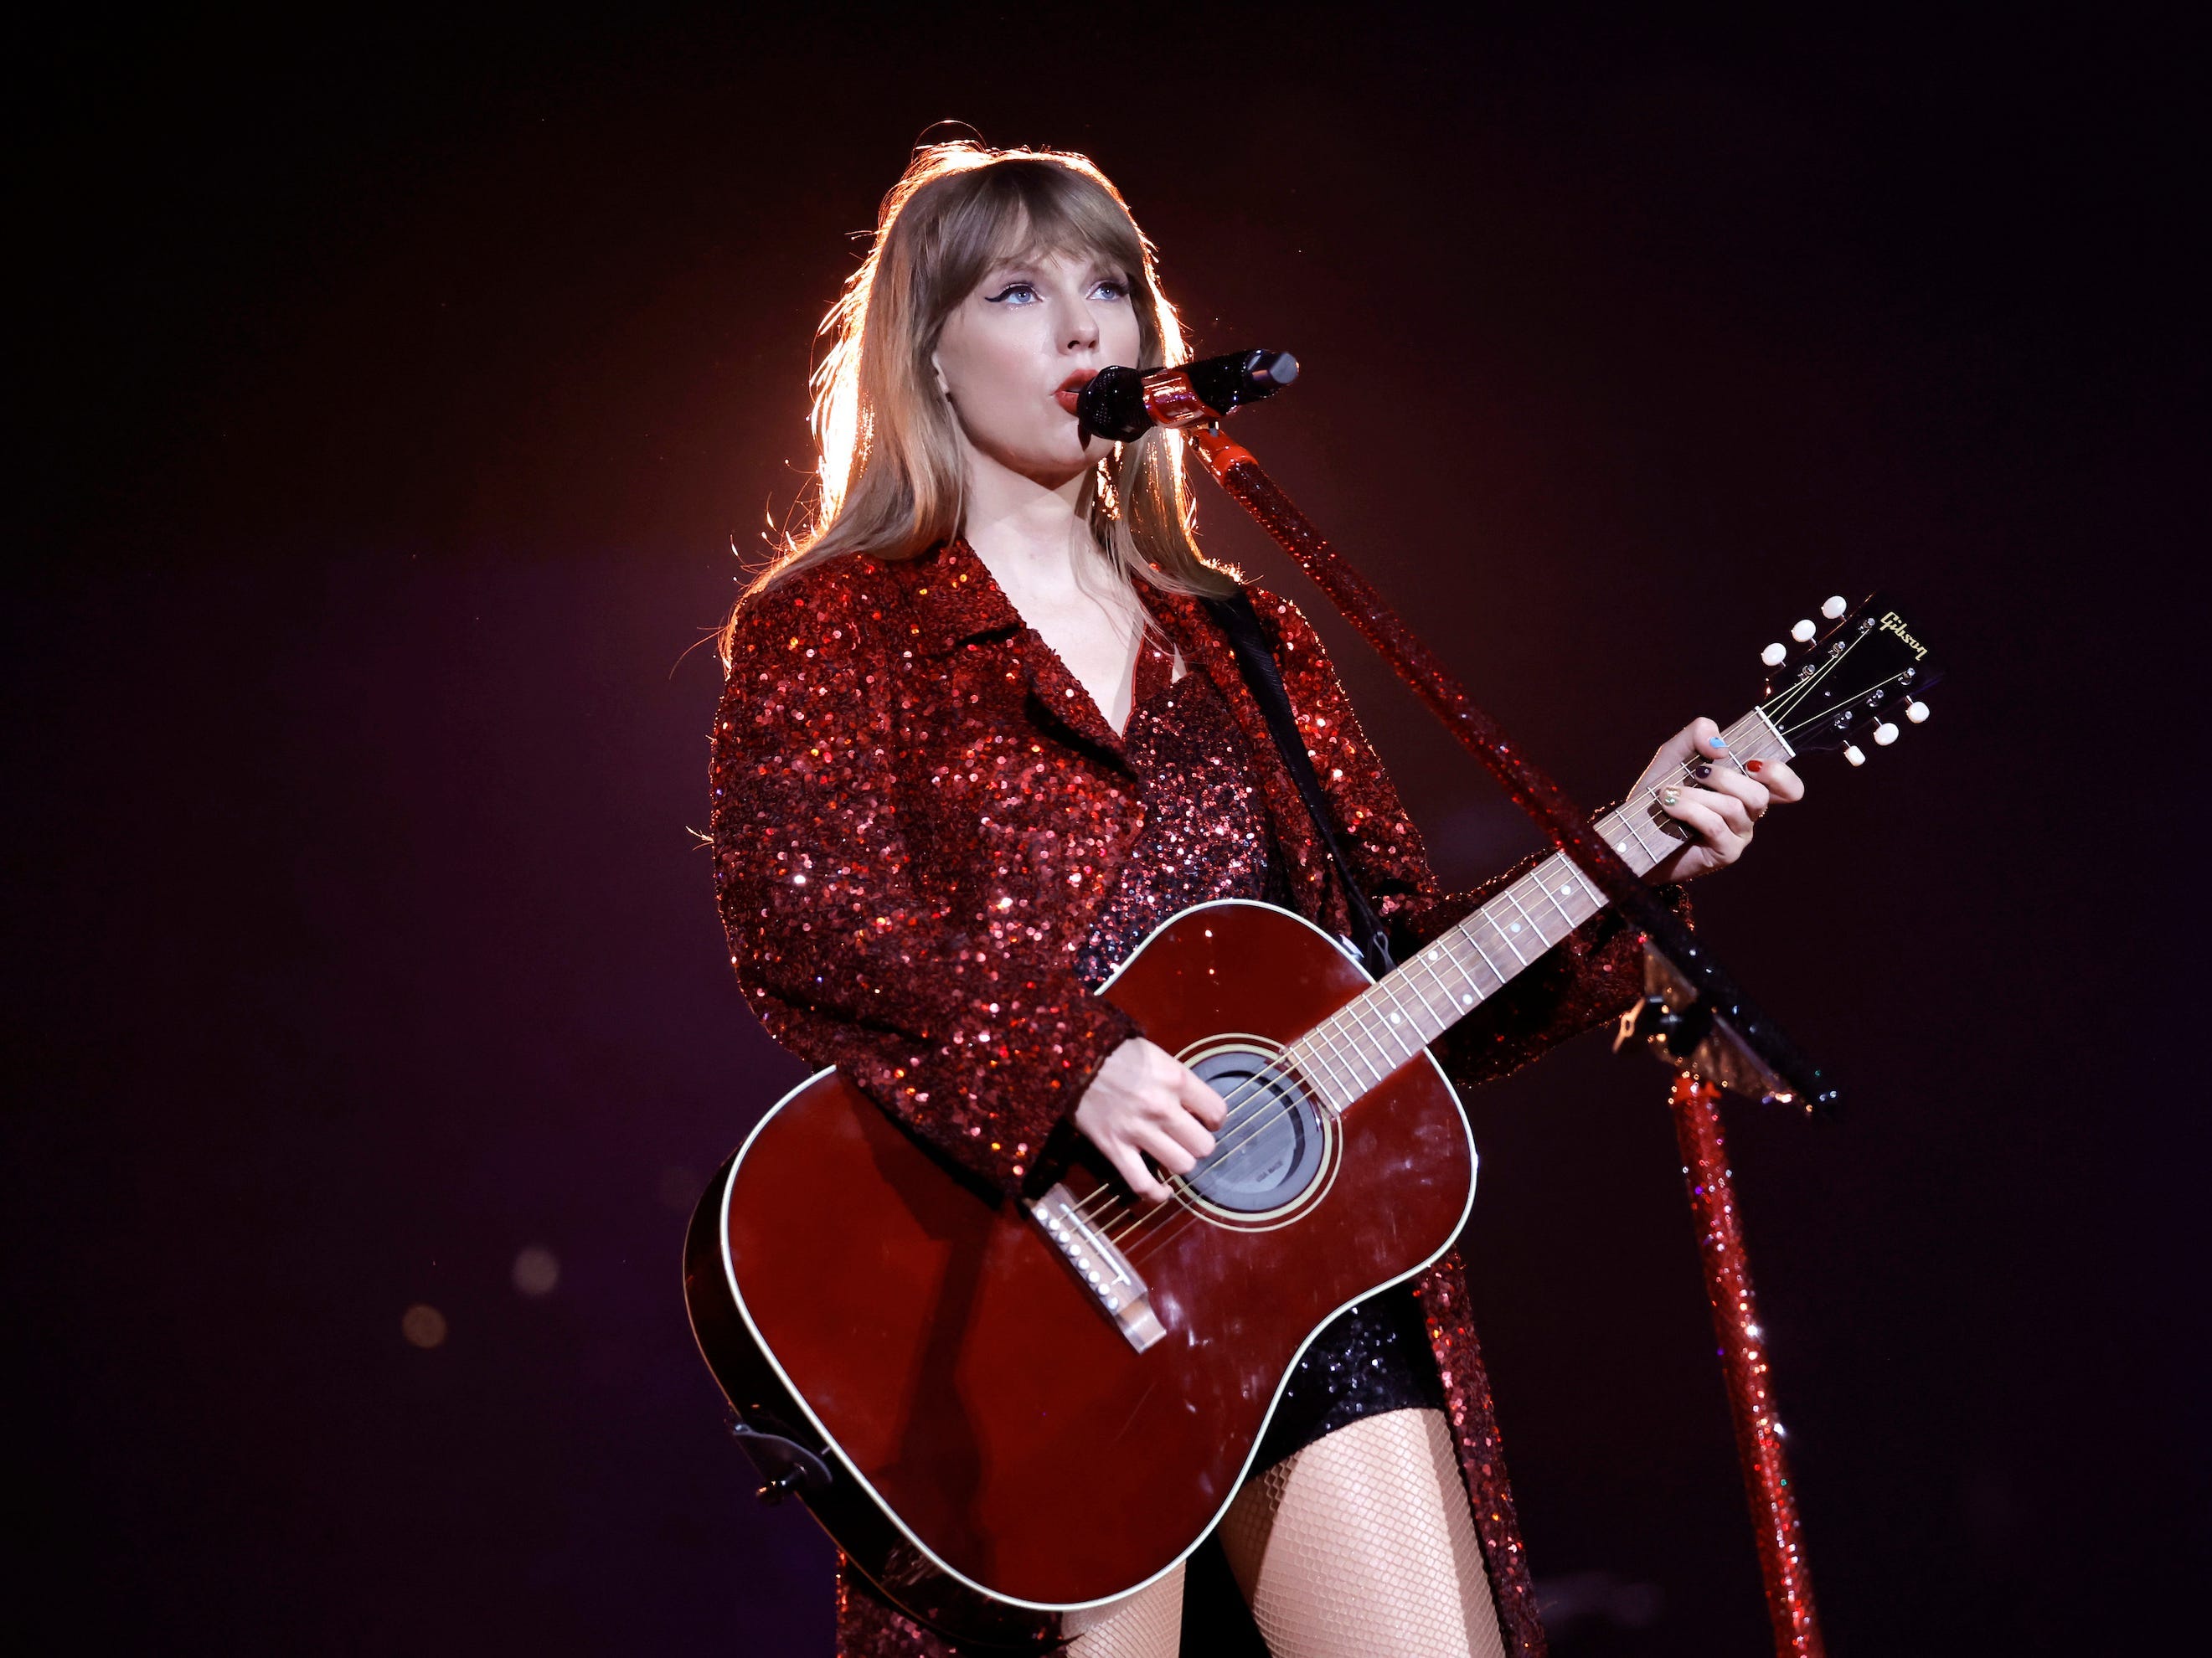 <p>The <a href="https://www.businessinsider.com/taylor-swift-all-too-well-10-minute-version-explained-reactions-2021-11">extended version of "All Too Well"</a> was released as the final track on "<a href="https://www.businessinsider.com/taylor-swift-red-taylors-version">Red (Taylor's Version)</a>" after years of fan anticipation.</p><p>It <a href="https://www.businessinsider.com/every-no-1-song-debut-billboard-hot-100" rel="noopener">debuted at No. 1</a> on the Hot 100, becoming the longest song ever to hold the chart's top position.</p>